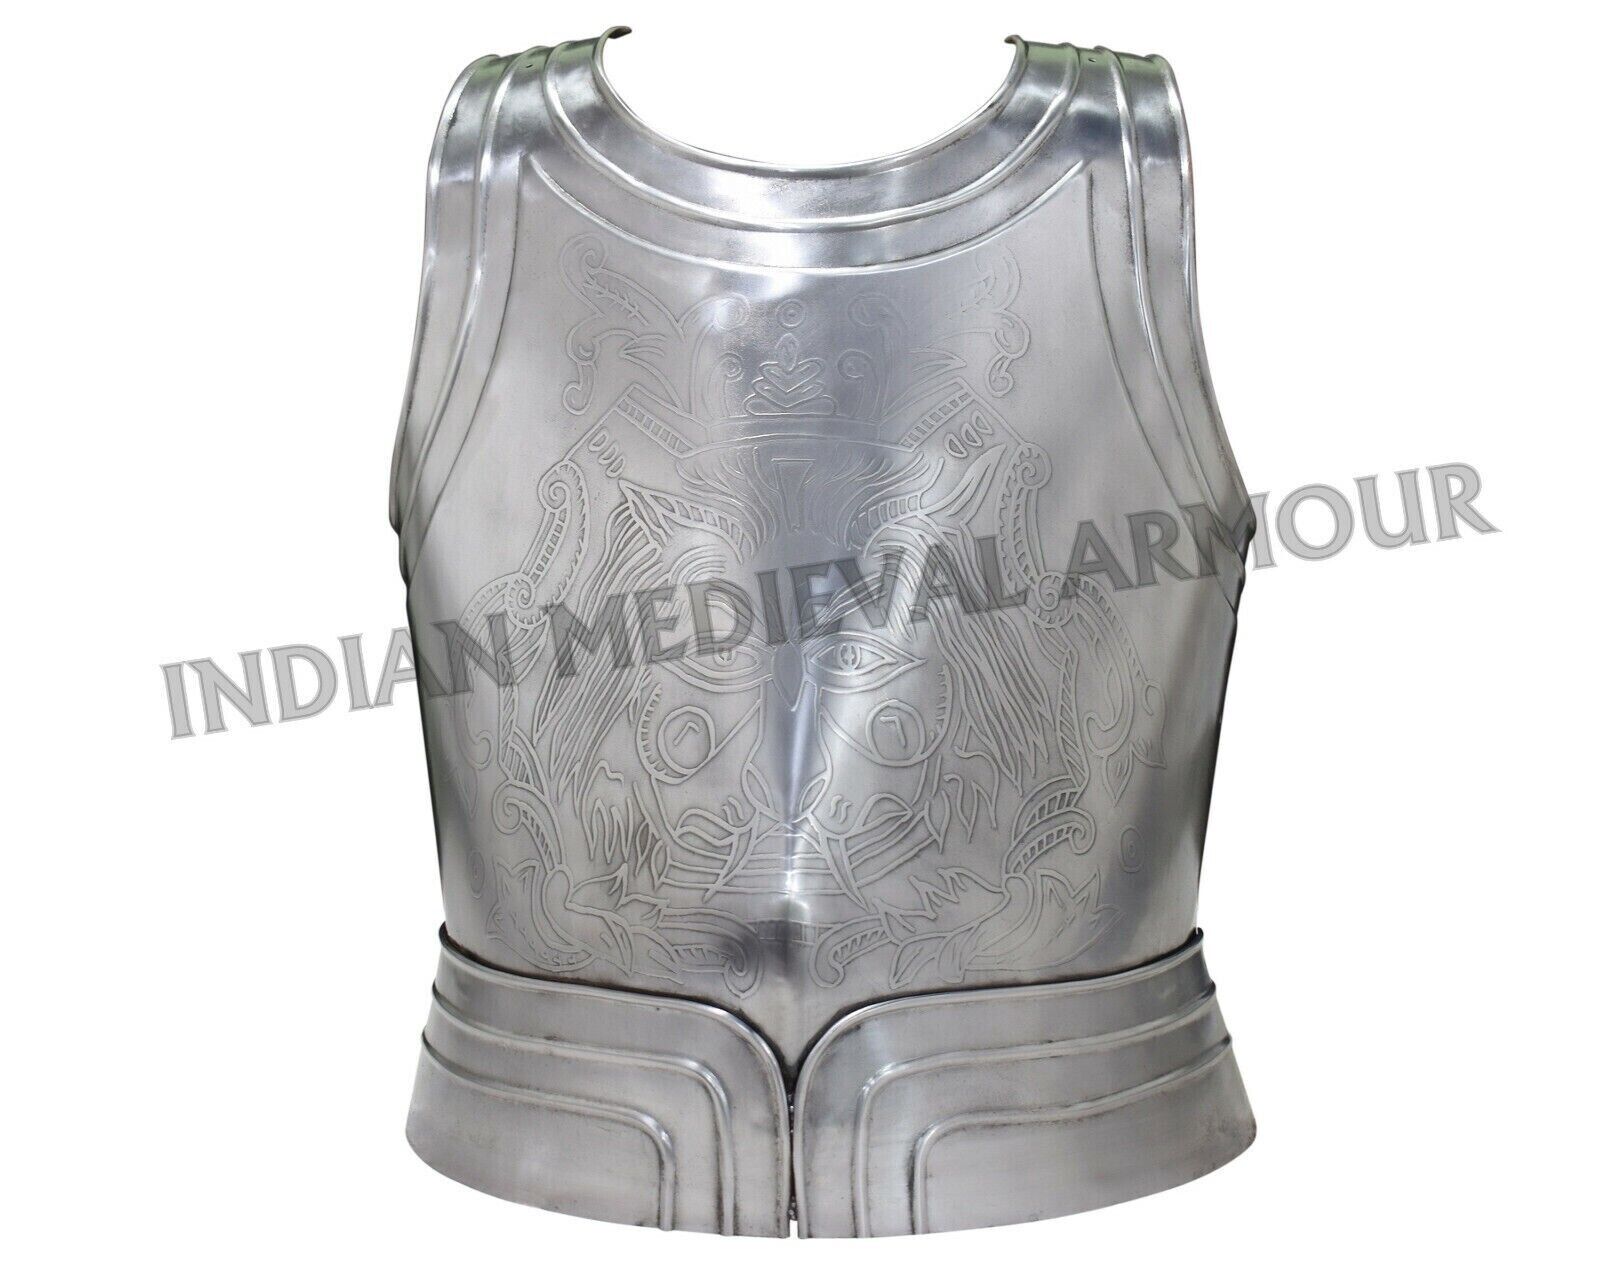 Etched Medieval Body Armour - SCA / Reenactment Steel Cuirass of Medieval Knight